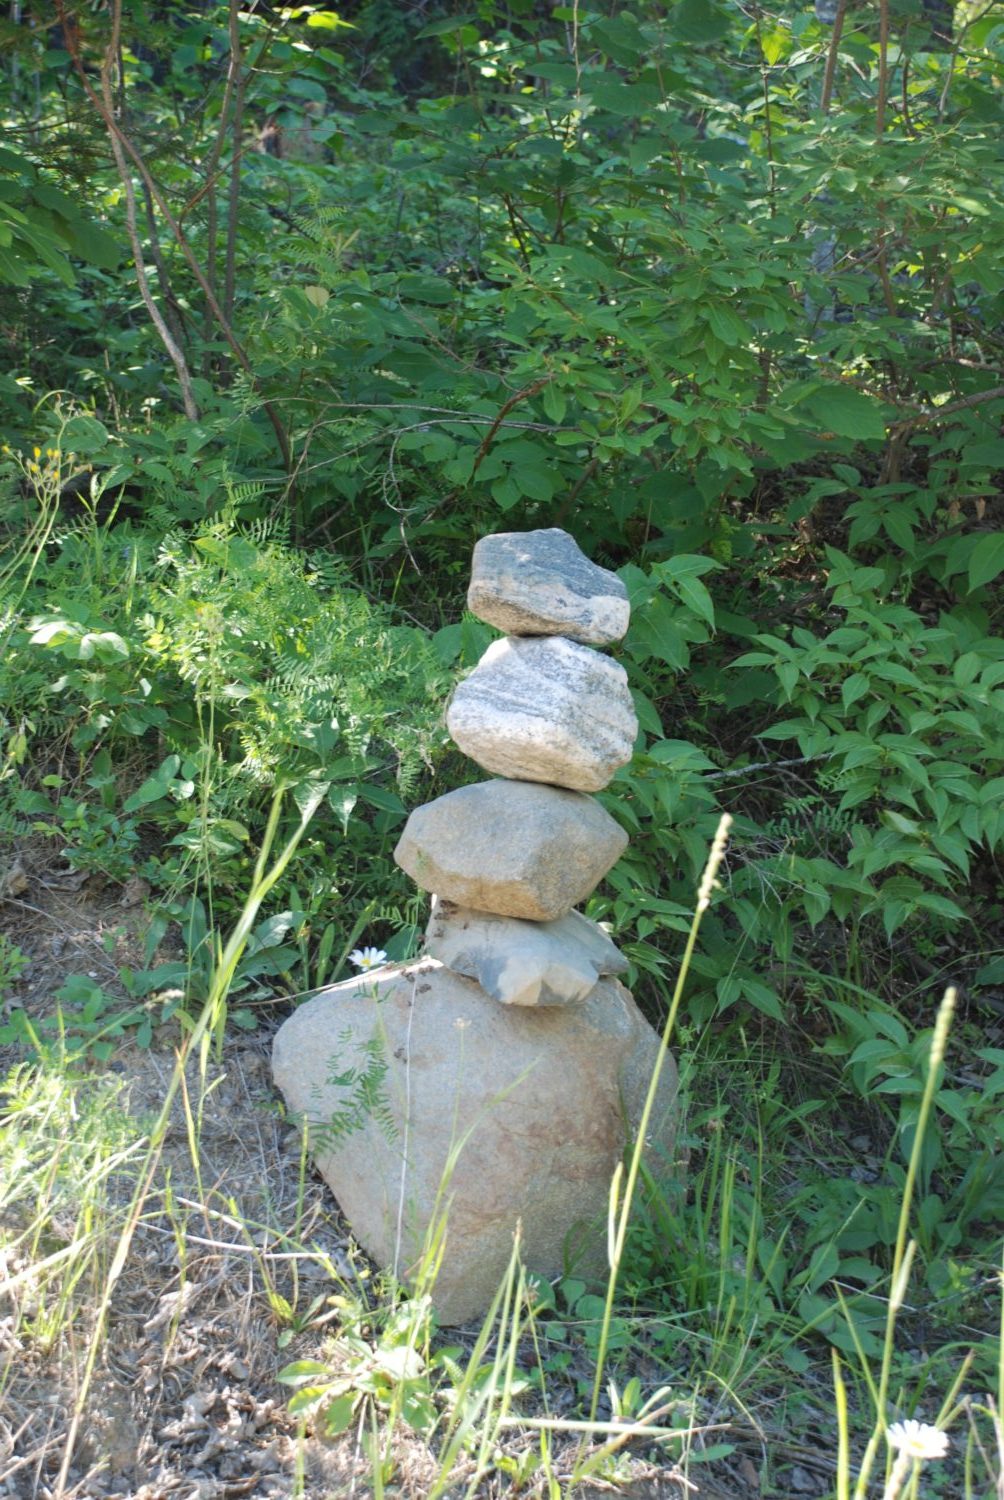 Builders of today’s roadside Inuksuit have added another meaning to the legacy of the Inuit ancient stone markers – it is about marking our presence and saying “I was here.